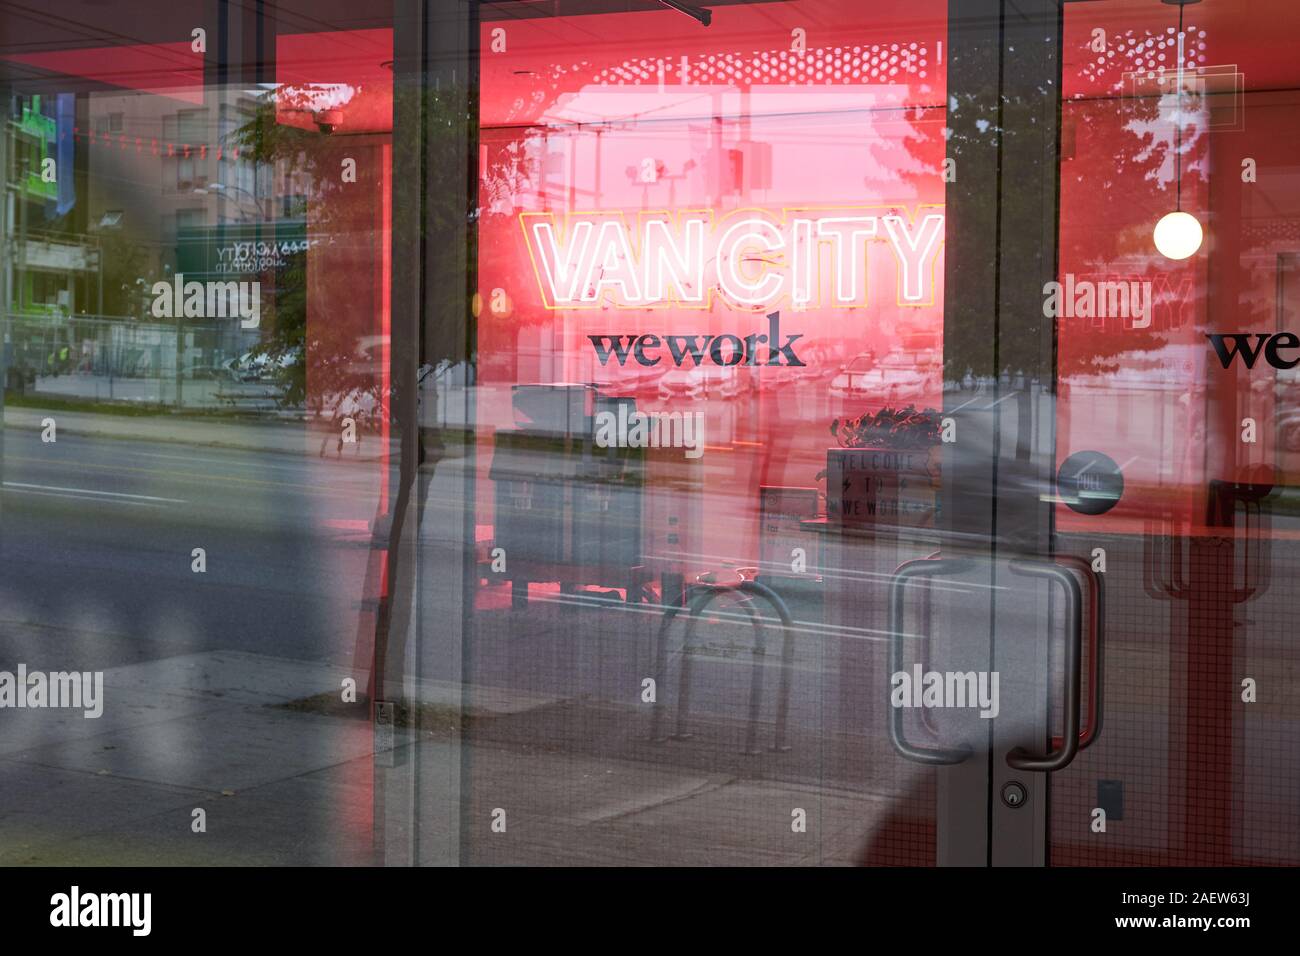 Vancouver, BC, Canada - Oct 12, 2019: A WeWork co-working space location in Vancouver. Stock Photo